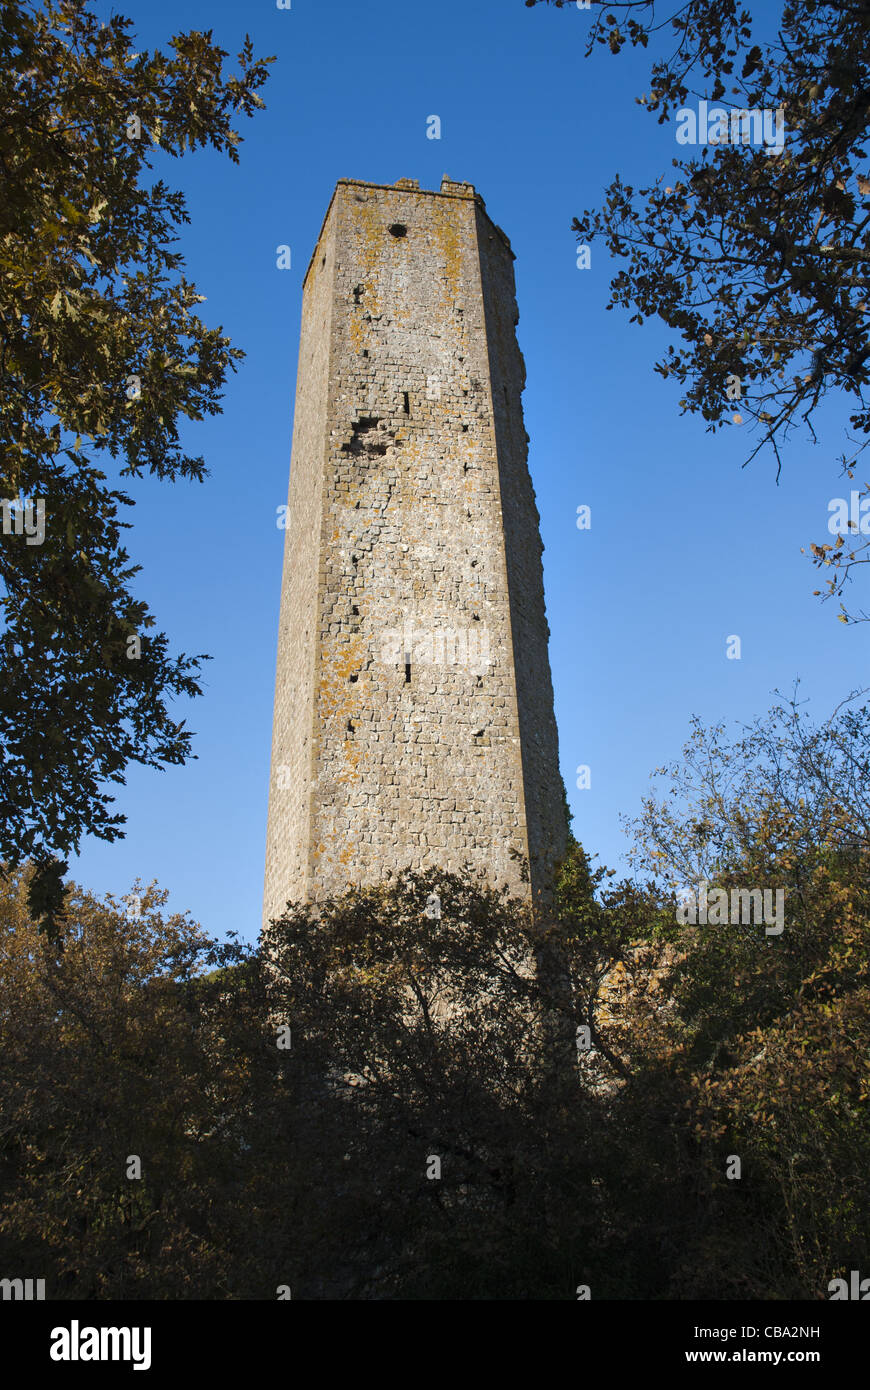 The so called Tower of Chia in the ancient medieval settlement of Colle Casale, province of Viterbo, Italy. Stock Photo